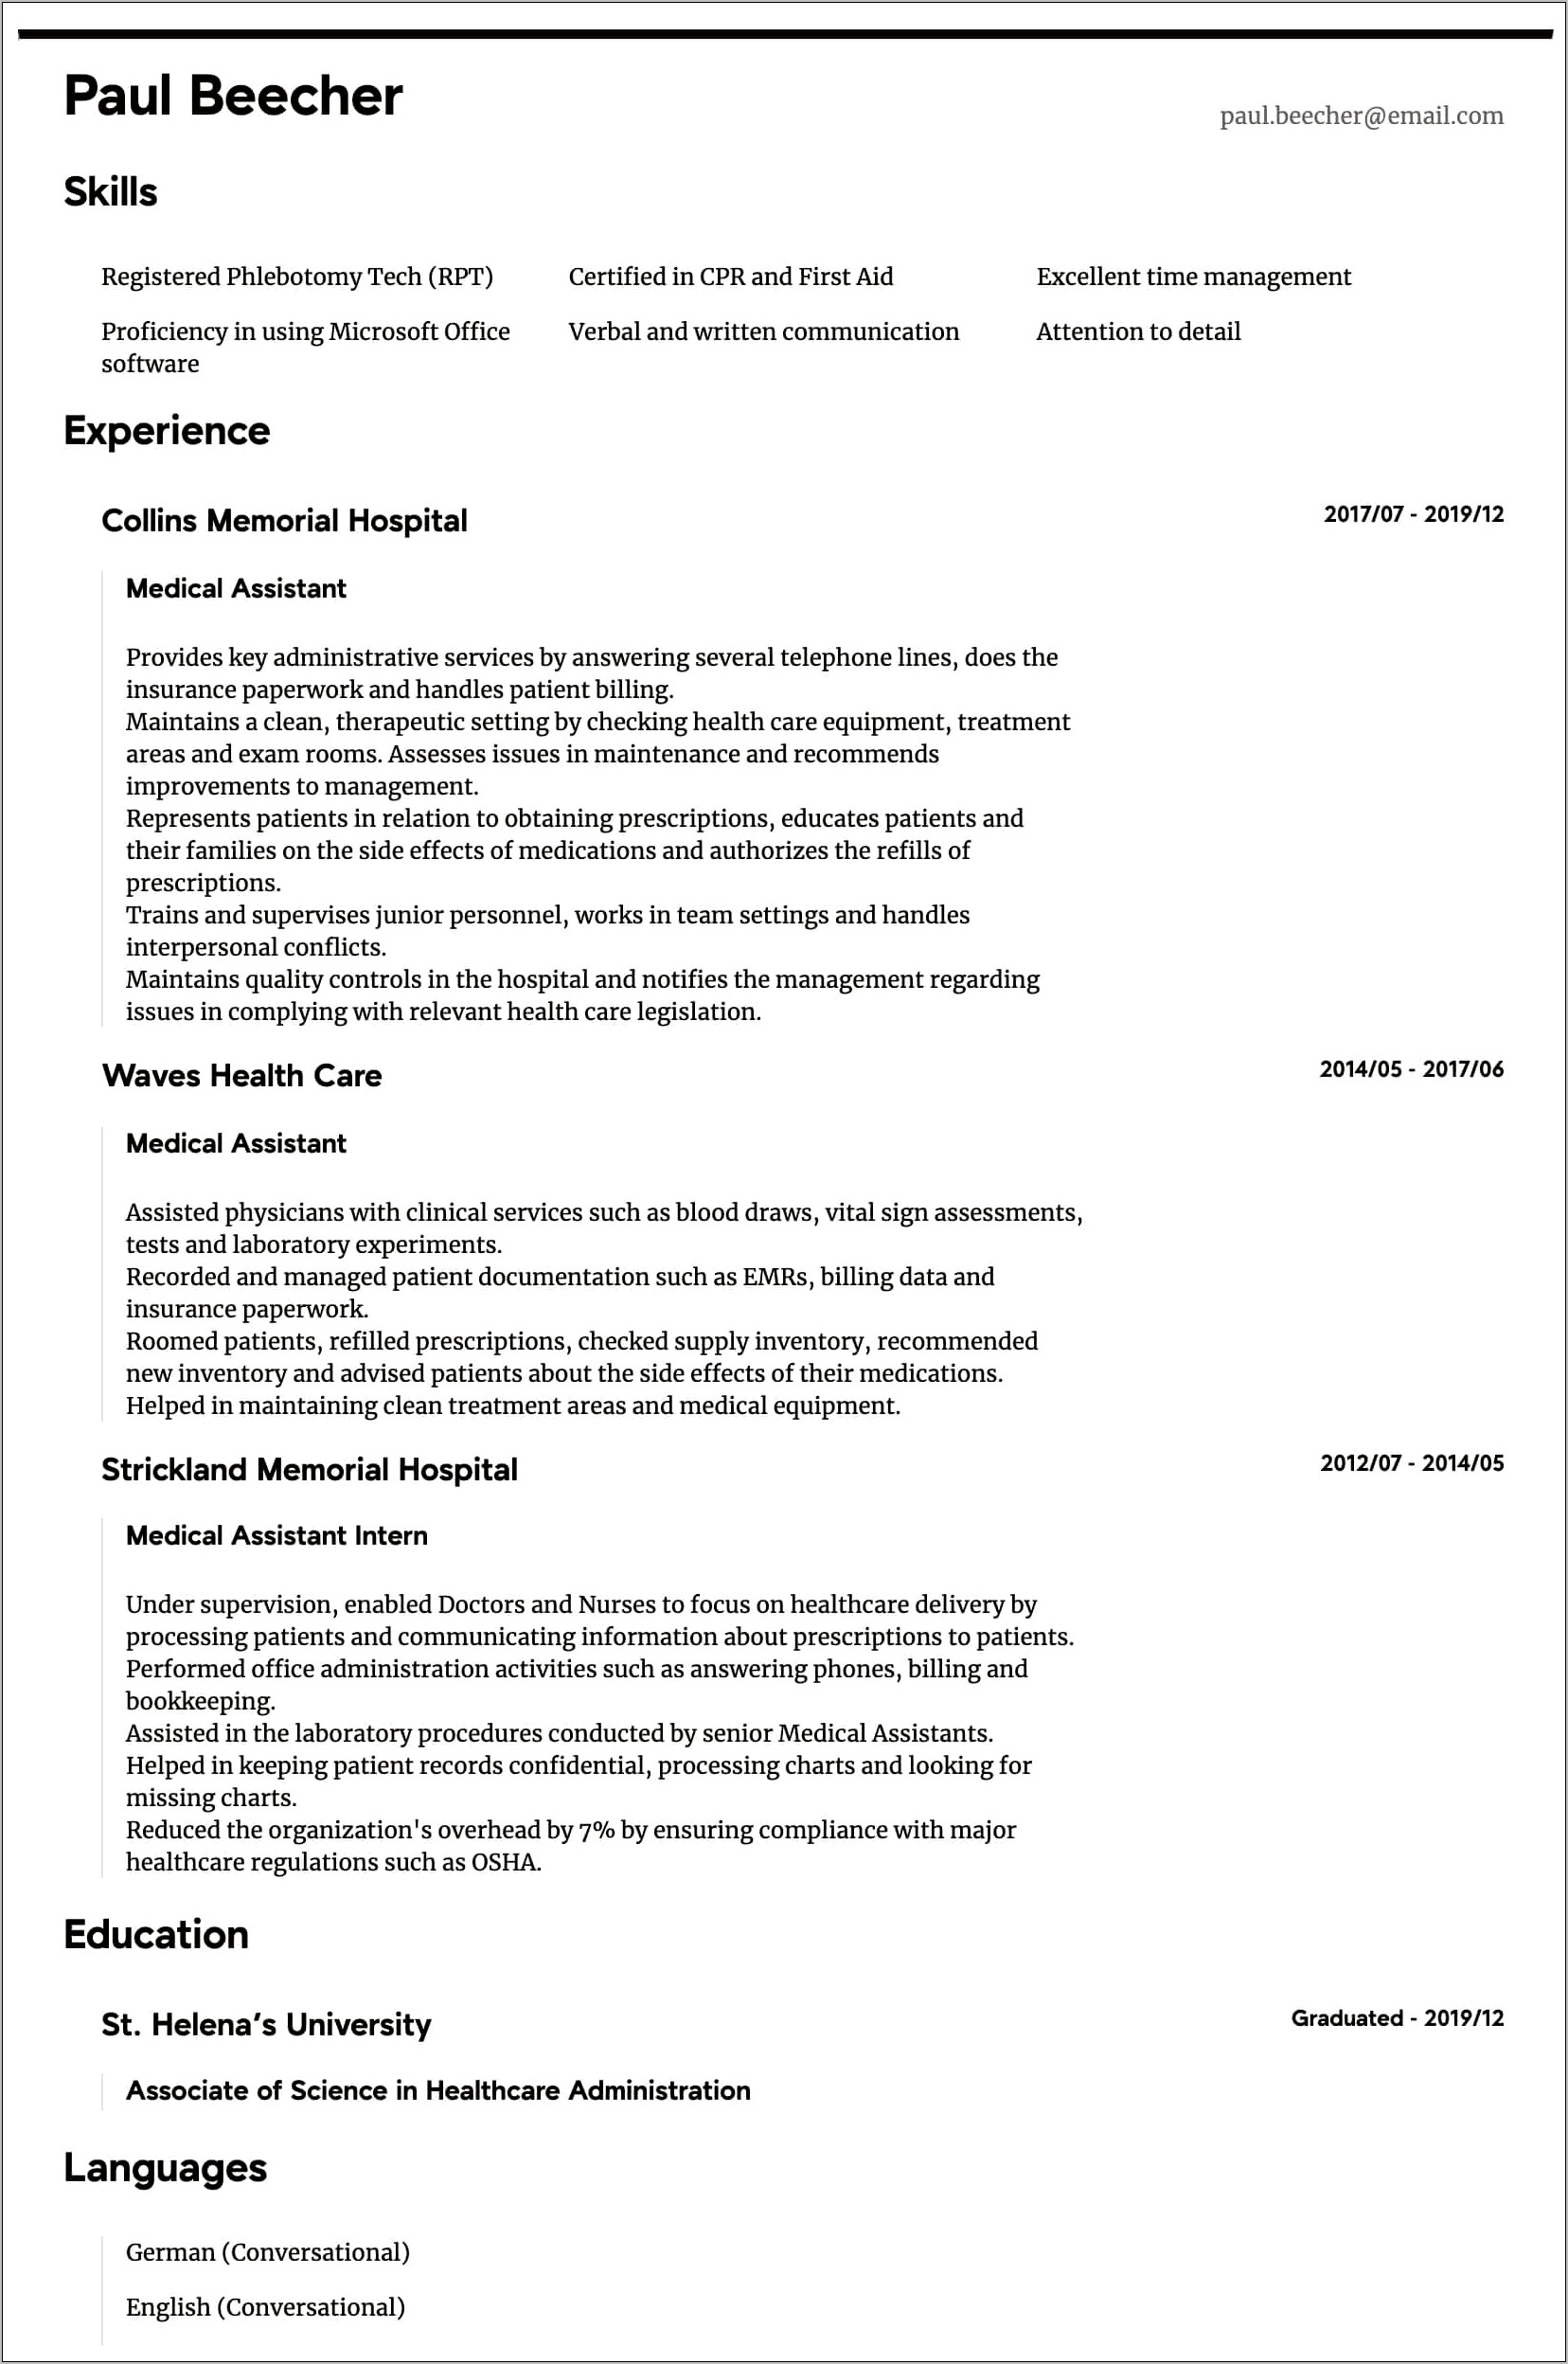 Resume Objective Statement Examples Medical Field